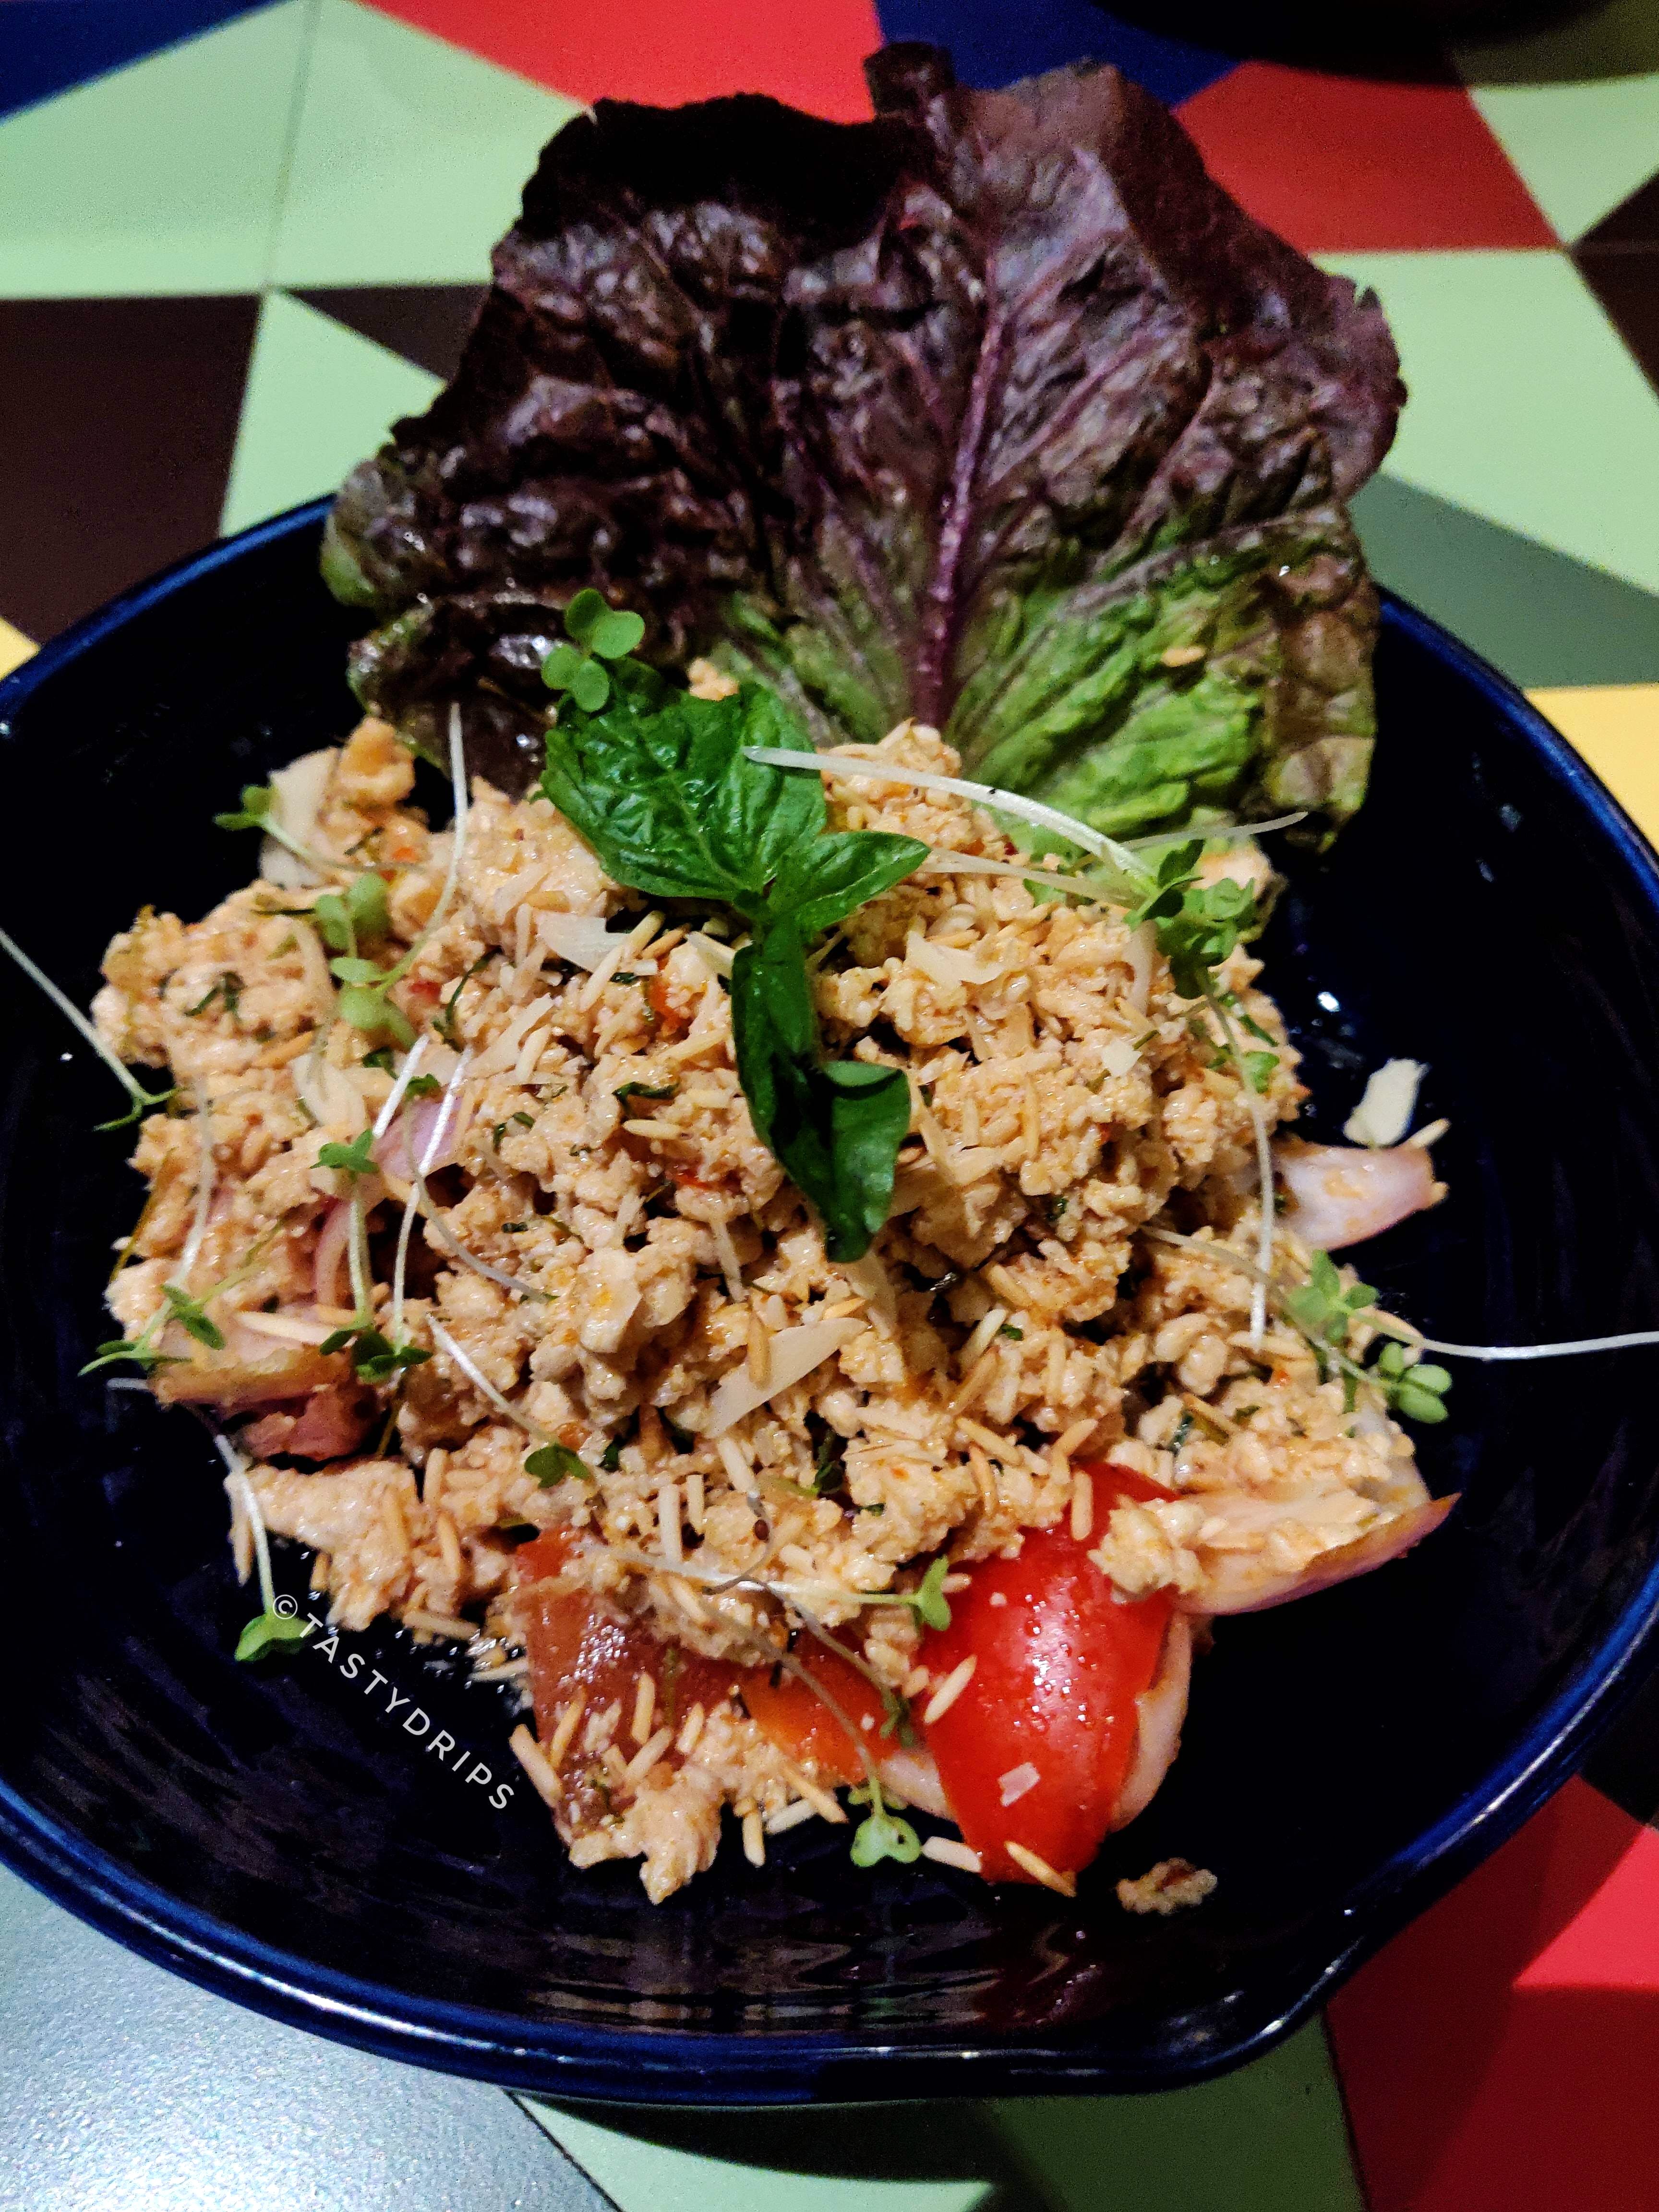 Dish,Food,Cuisine,Thai fried rice,Ingredient,Rice,Produce,Fried rice,Meat,Staple food